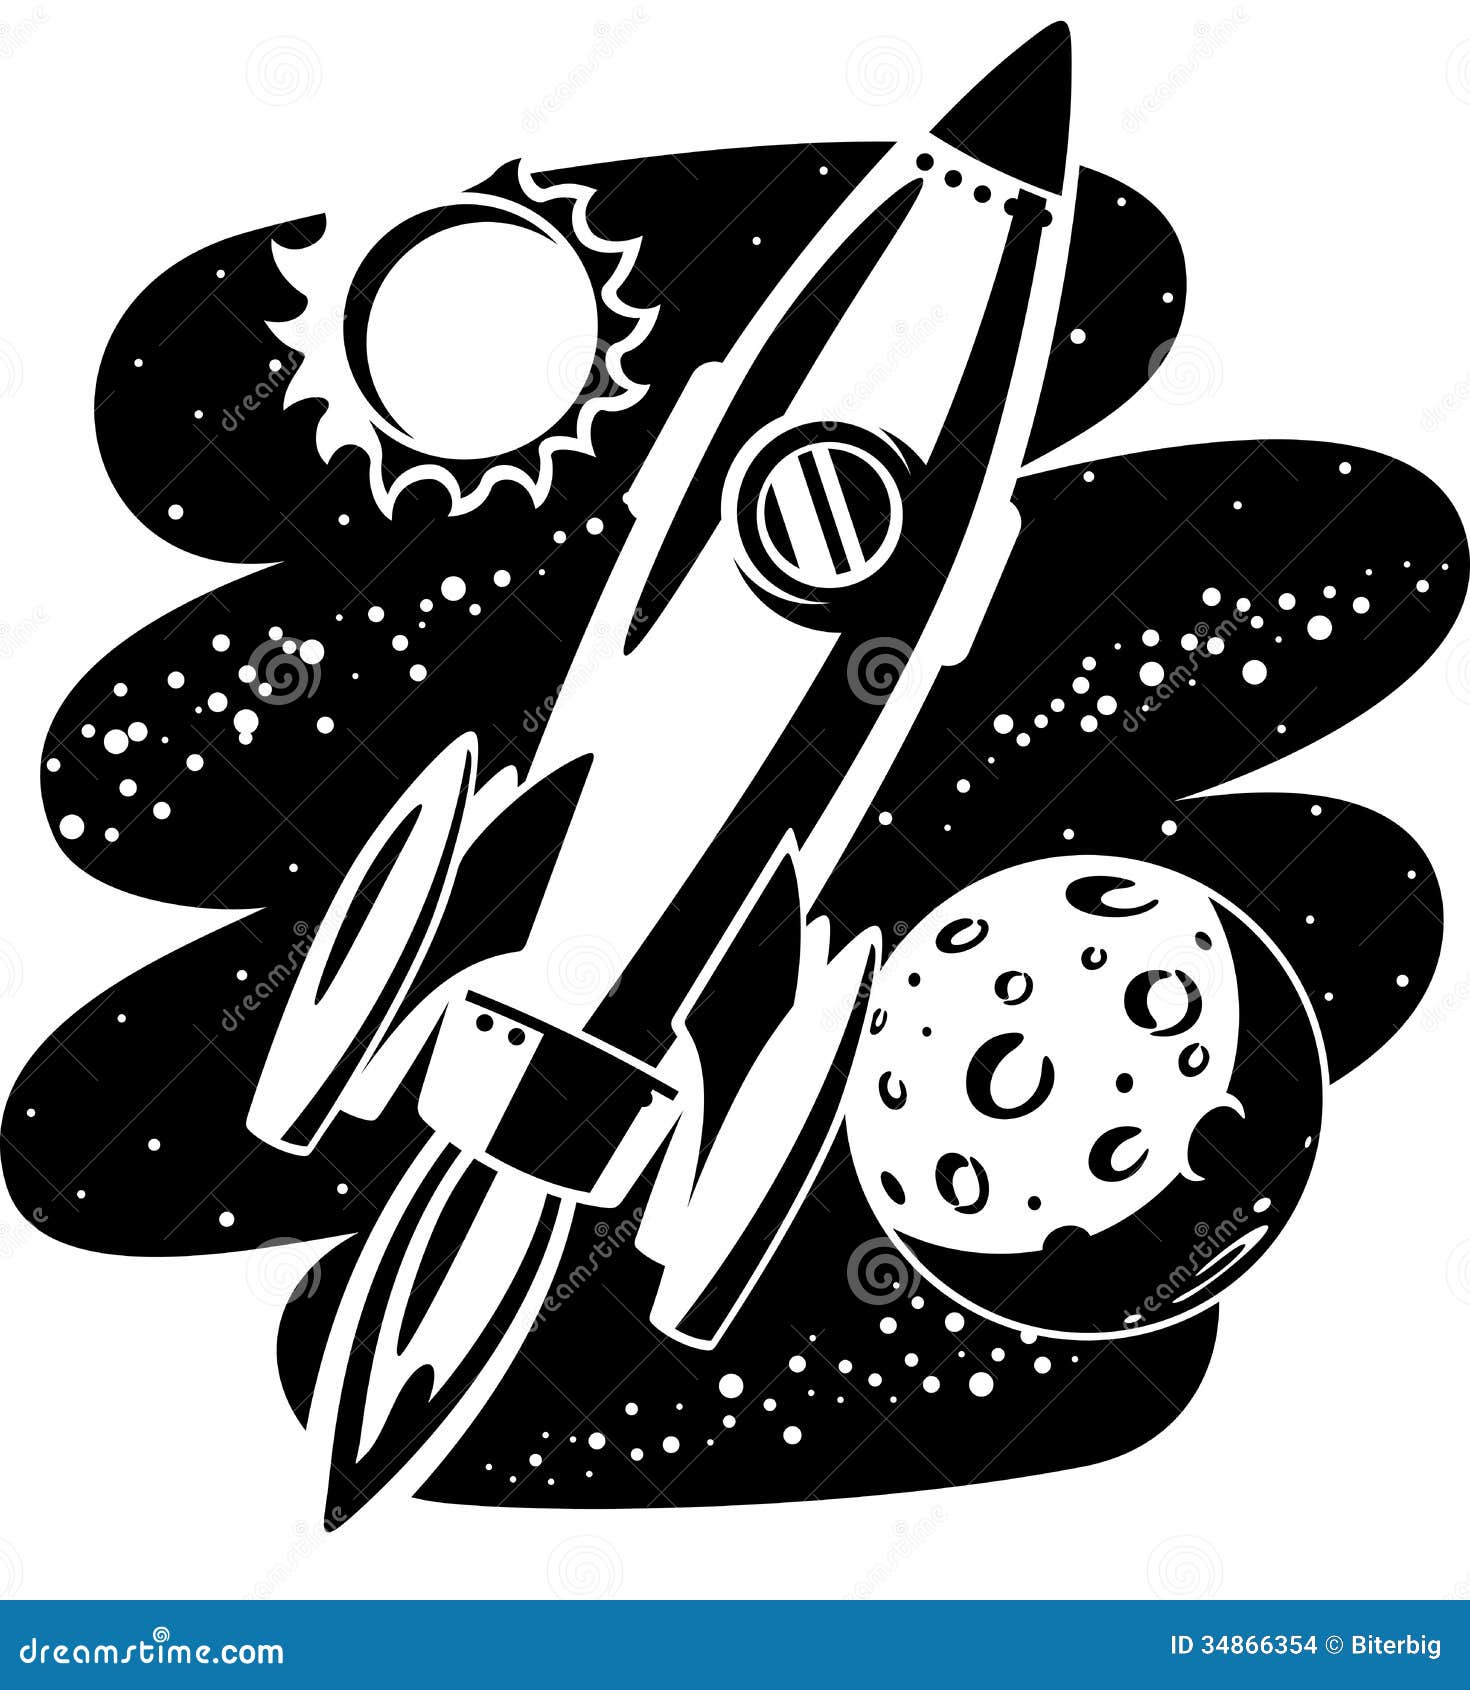 clip art outer space black and white - photo #16